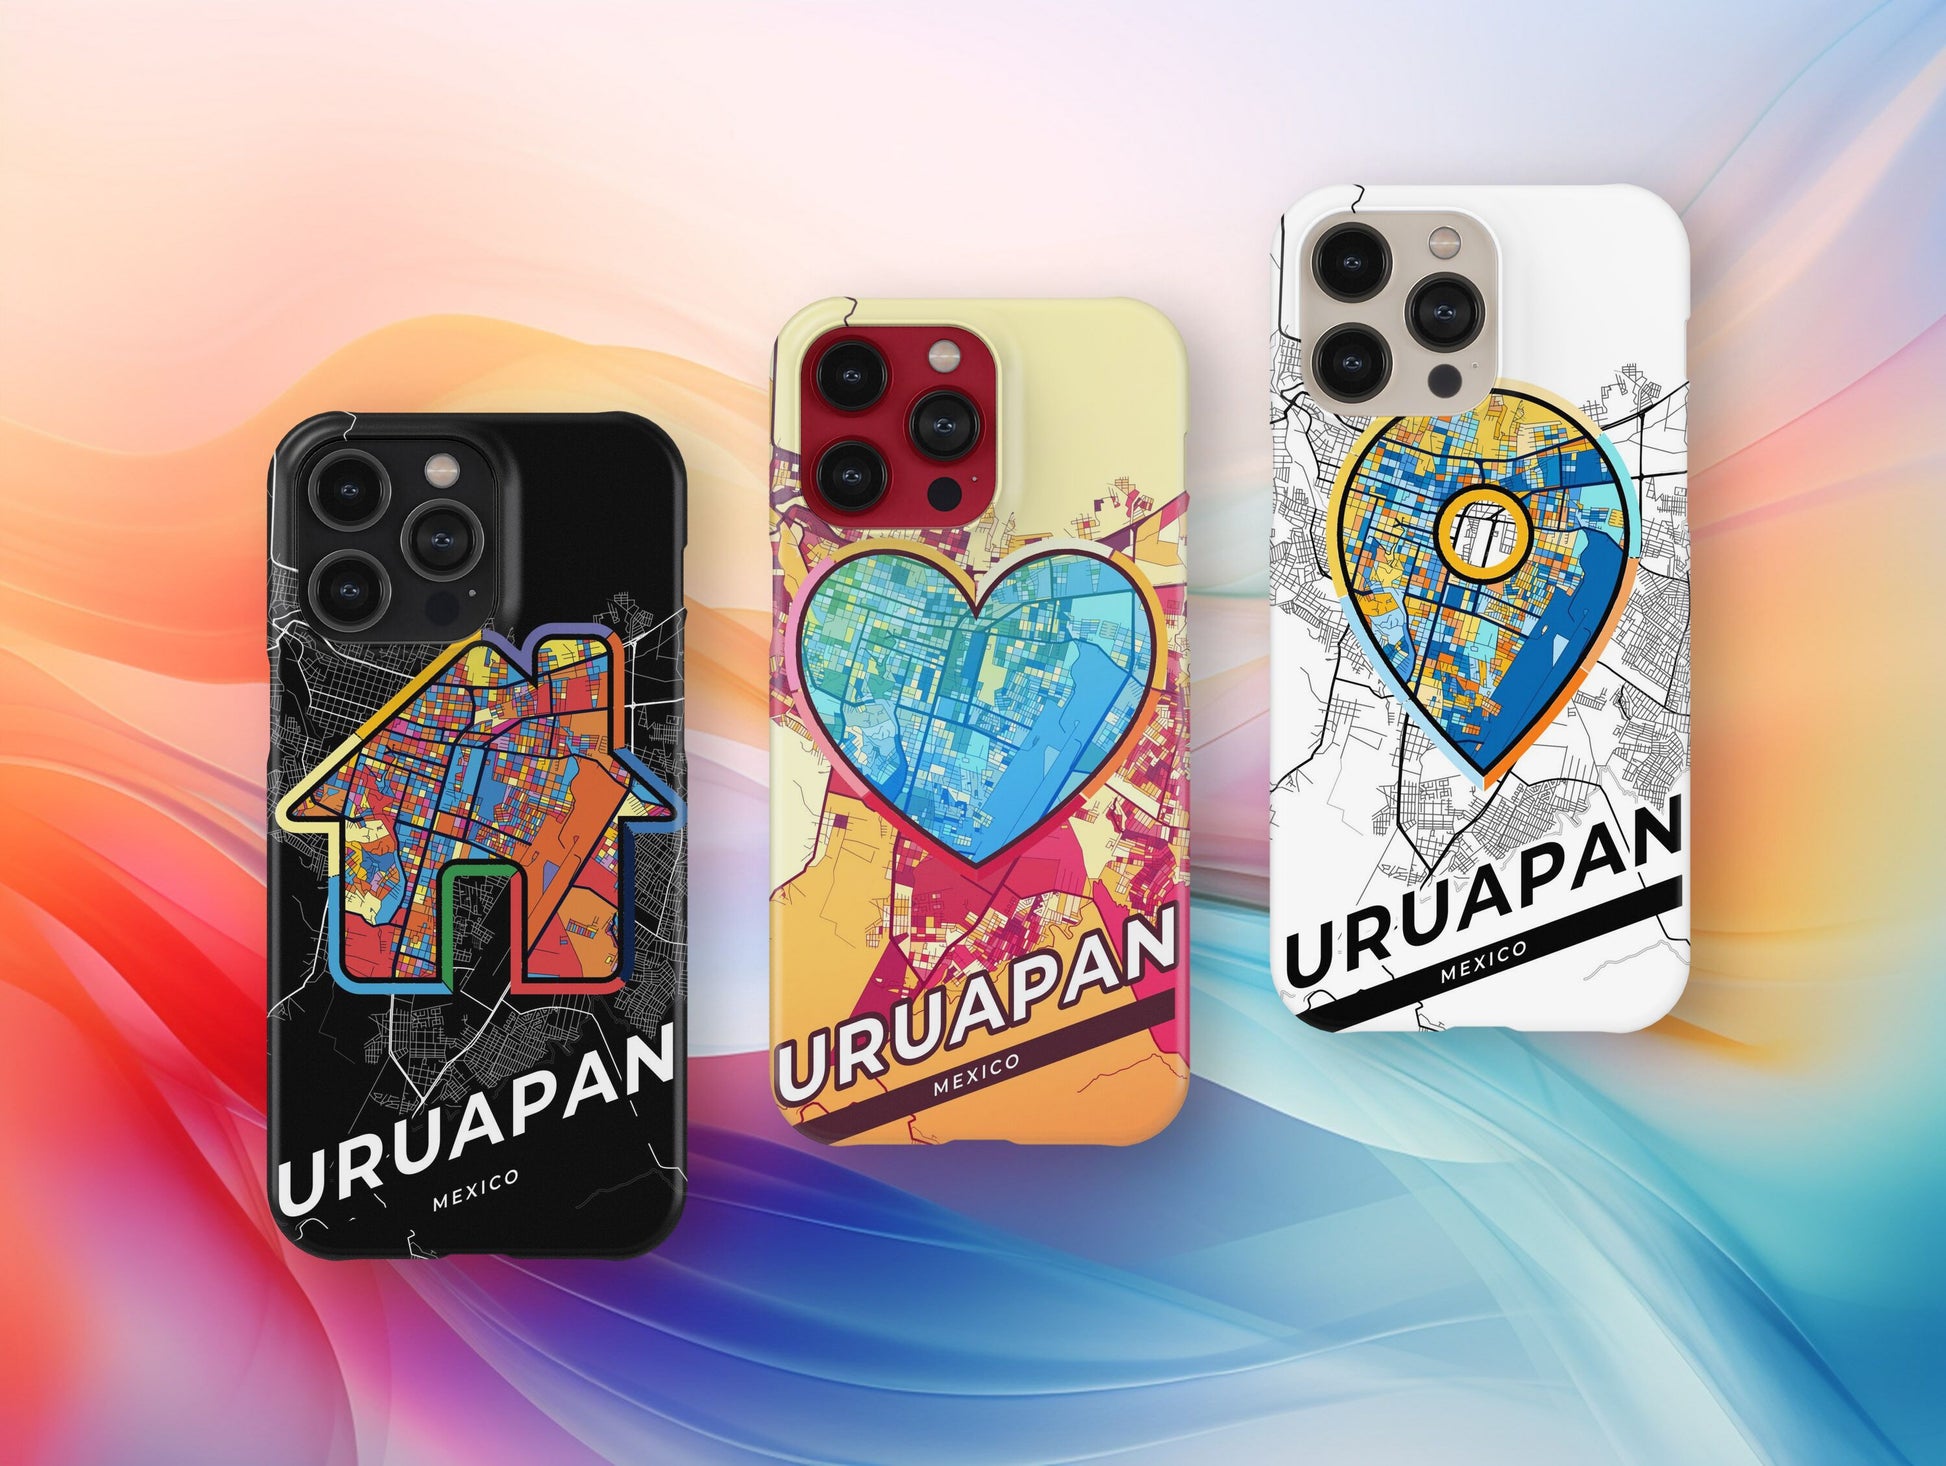 Uruapan Mexico slim phone case with colorful icon